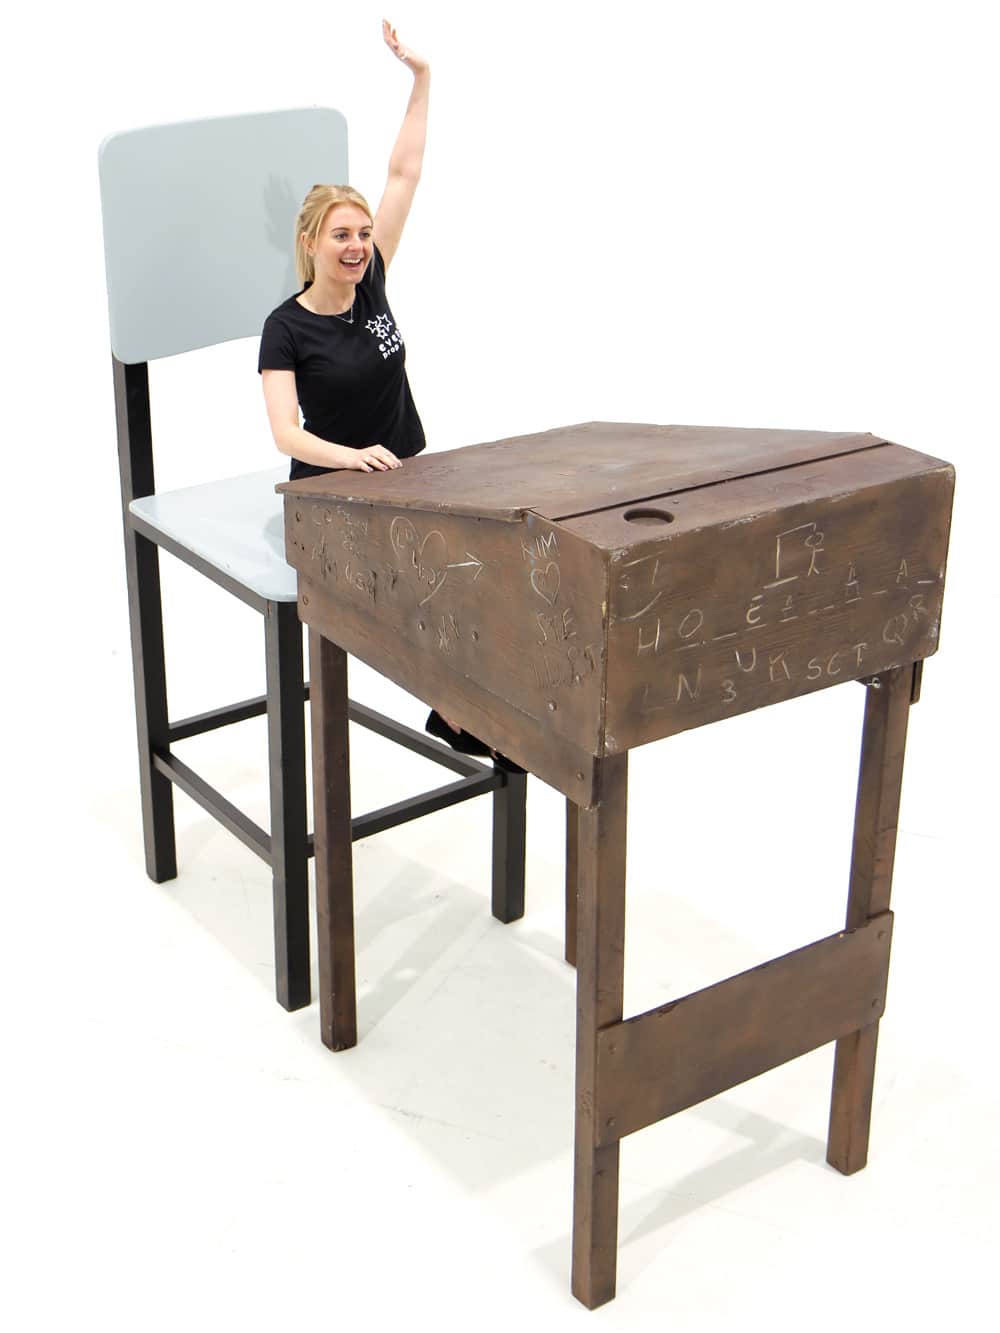 Giant School Desk and Chair